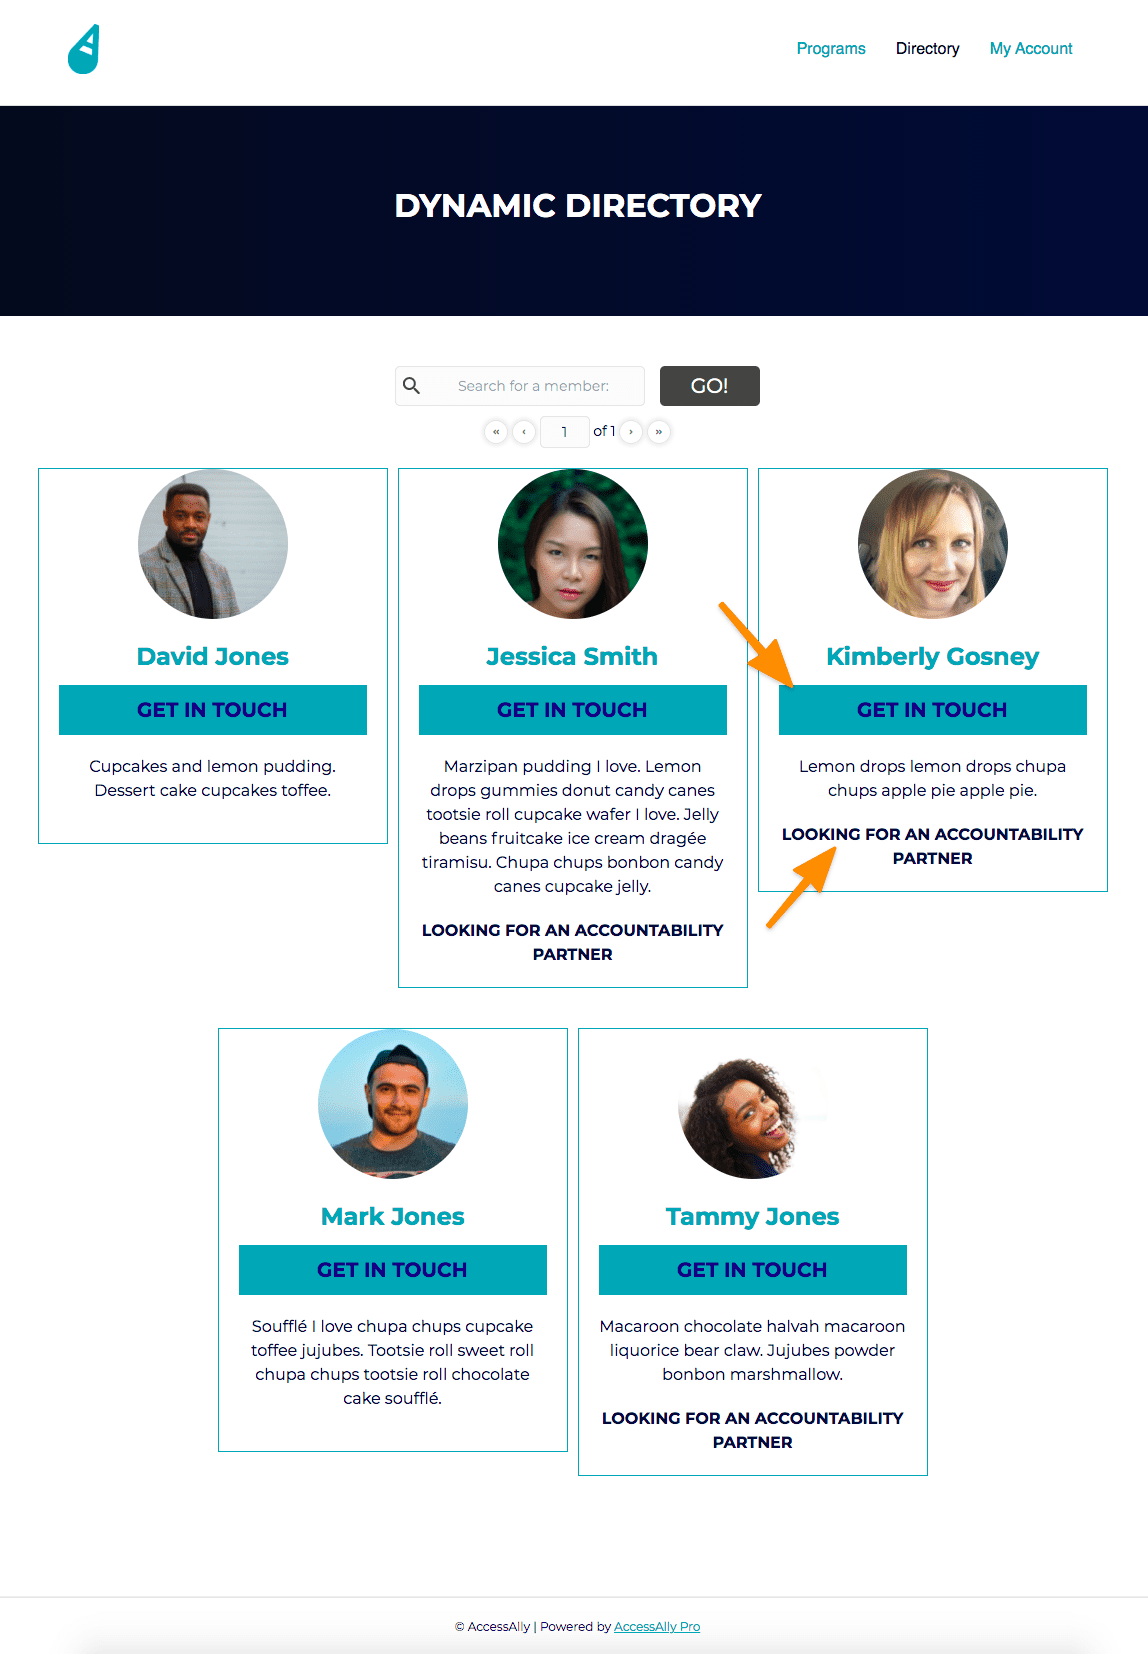 Member Directory with Accountability